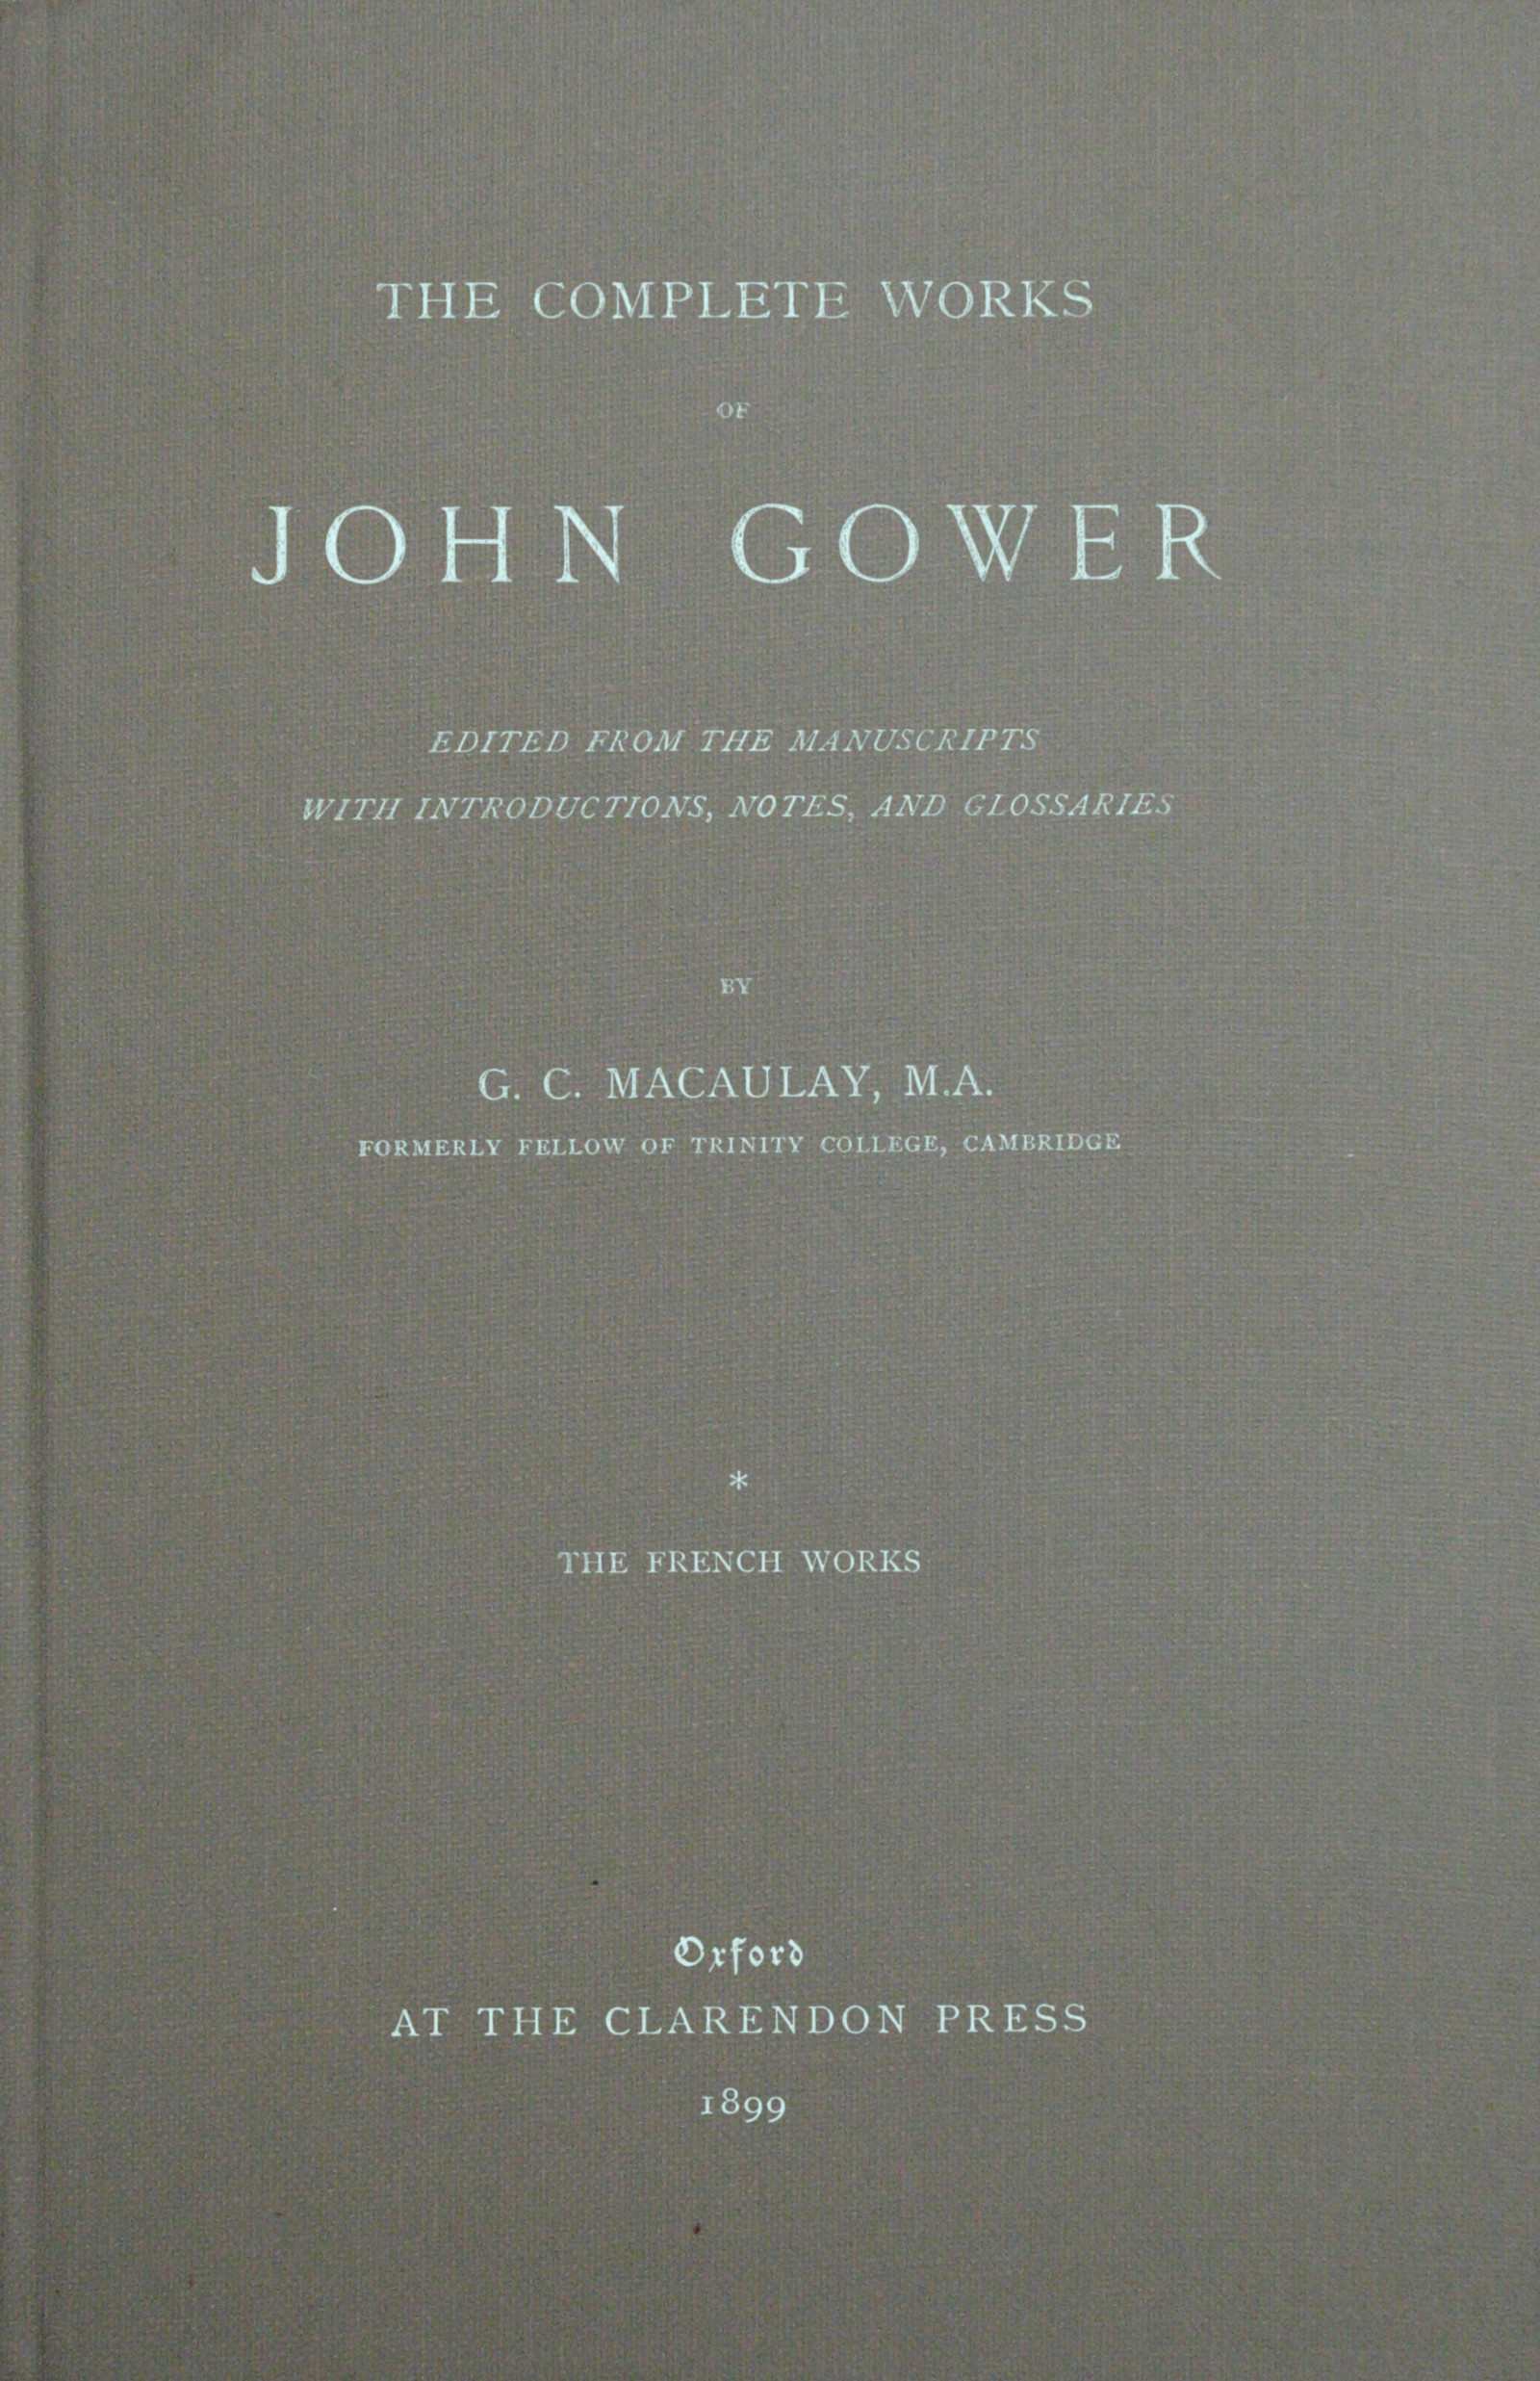 The complete works of John Gower, volume 1